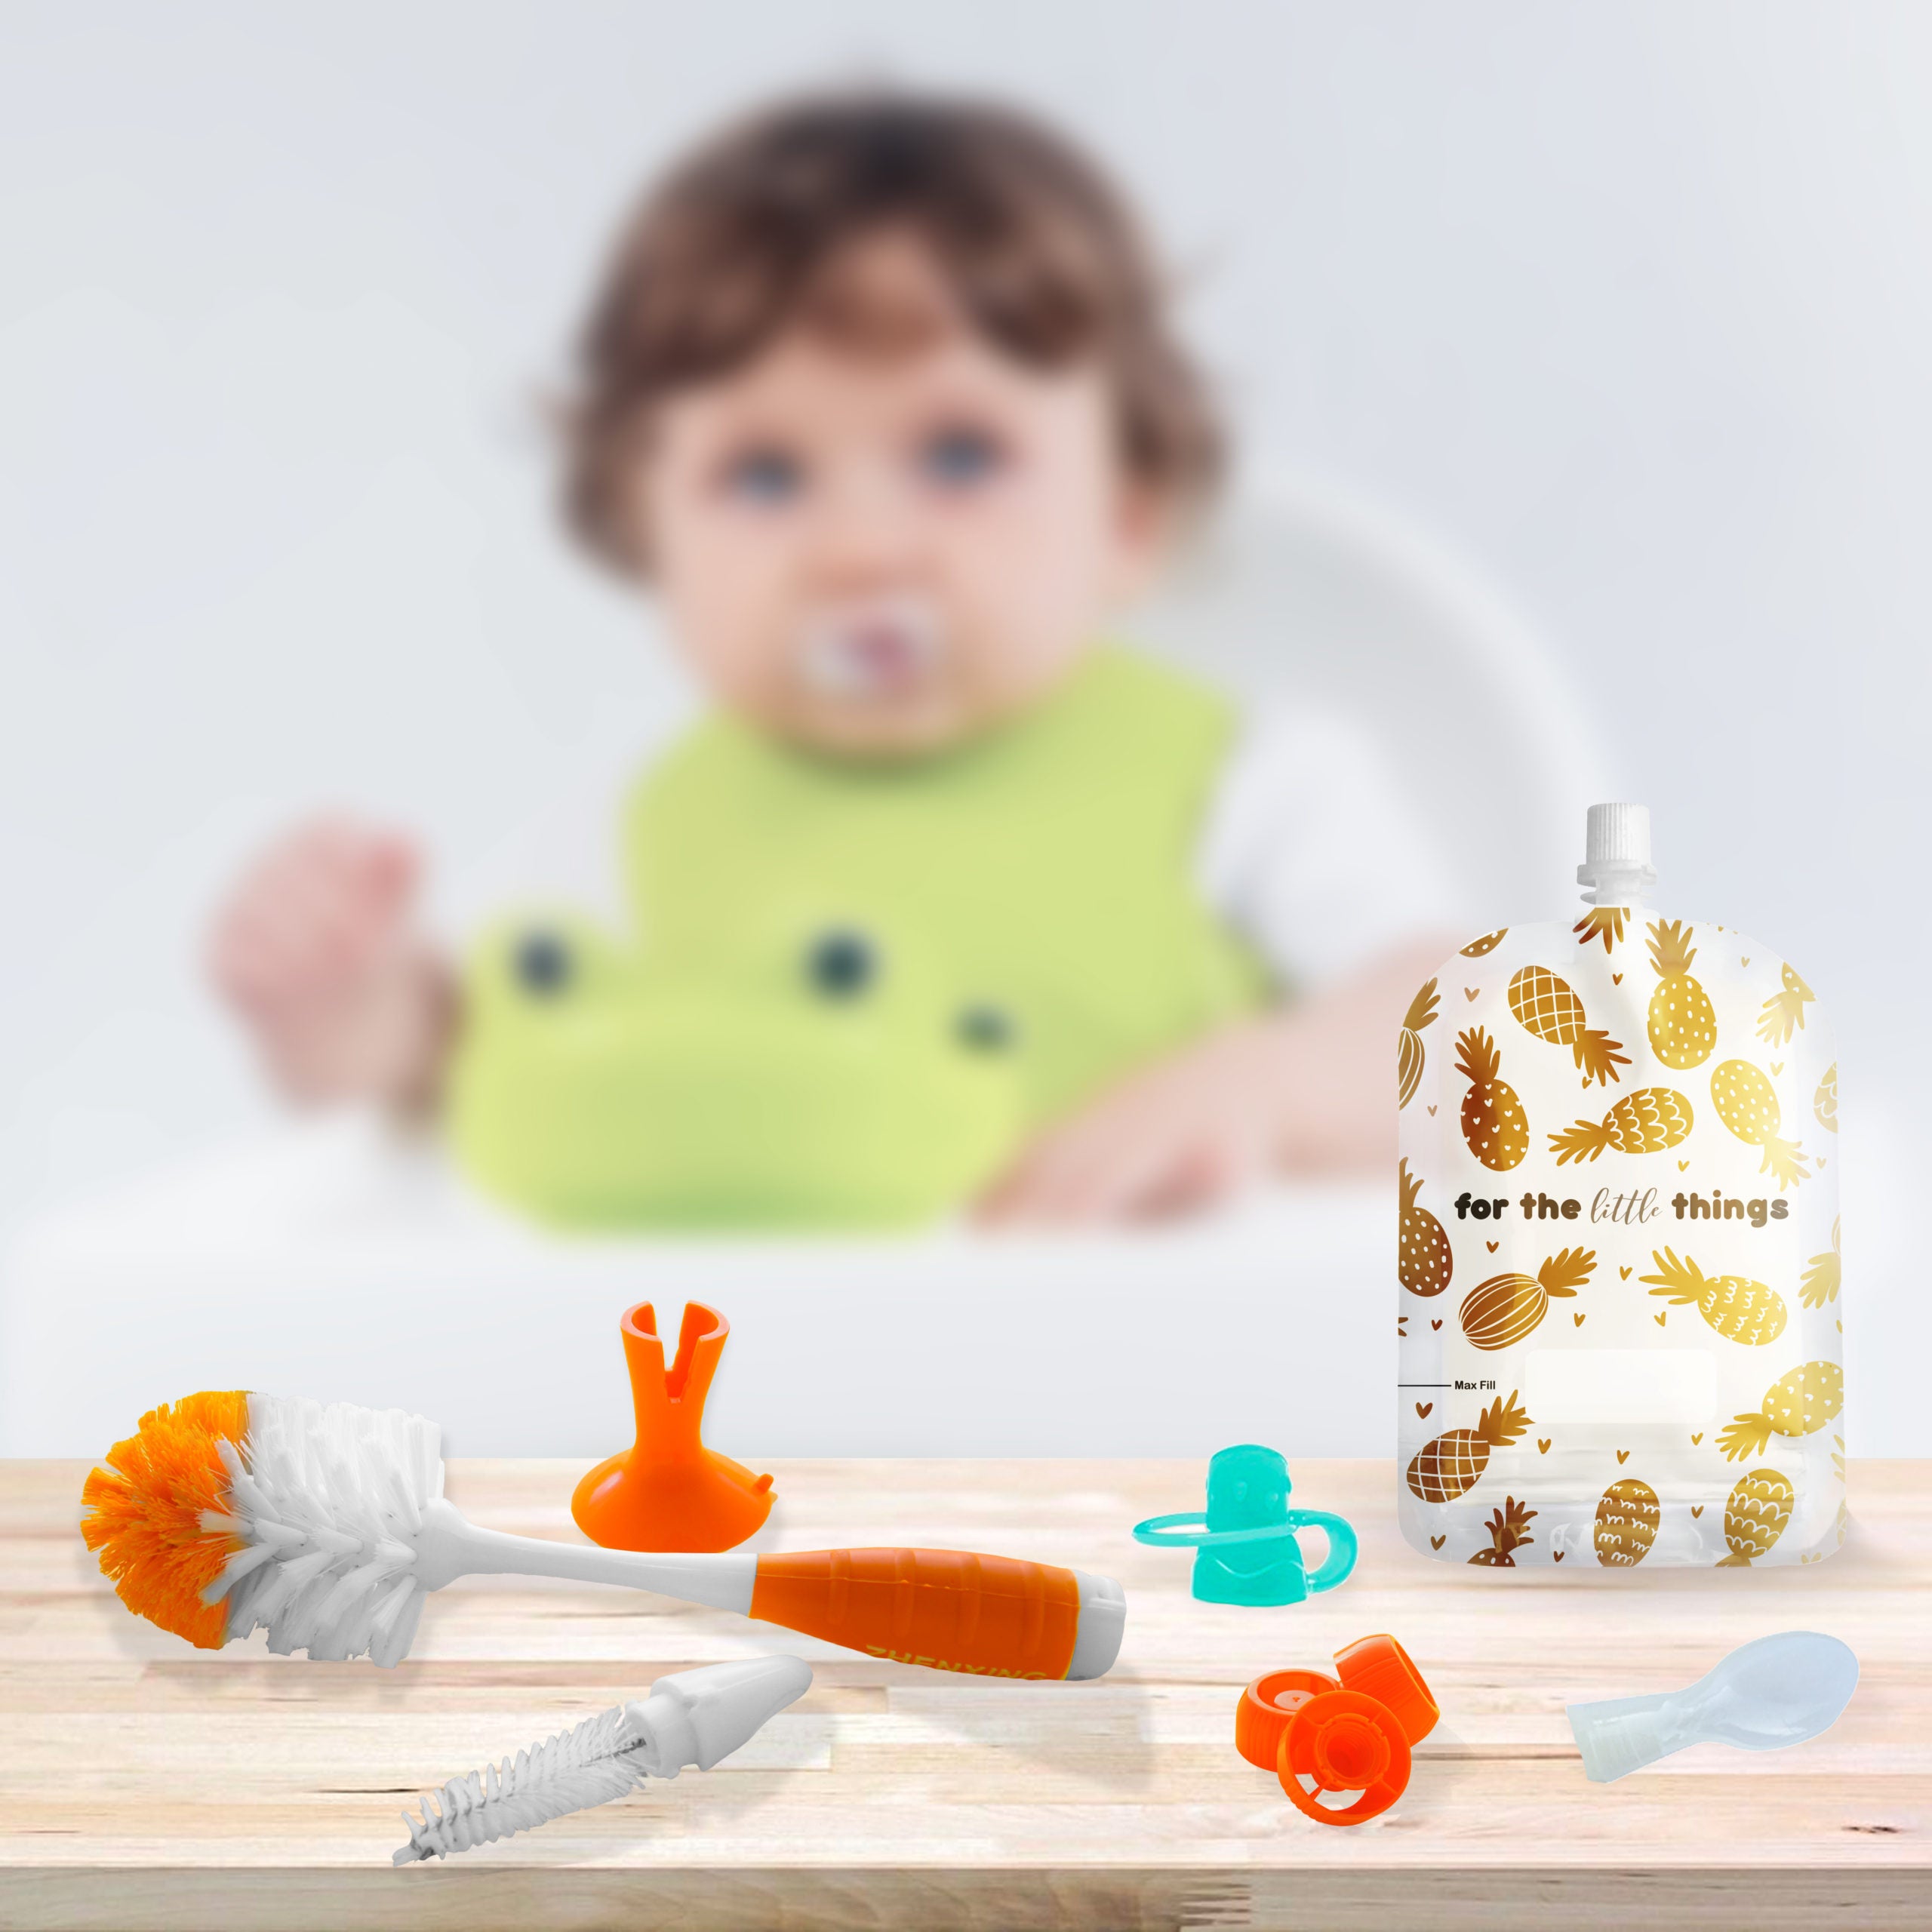 Sinchies first solids (weaning) kit MEGA